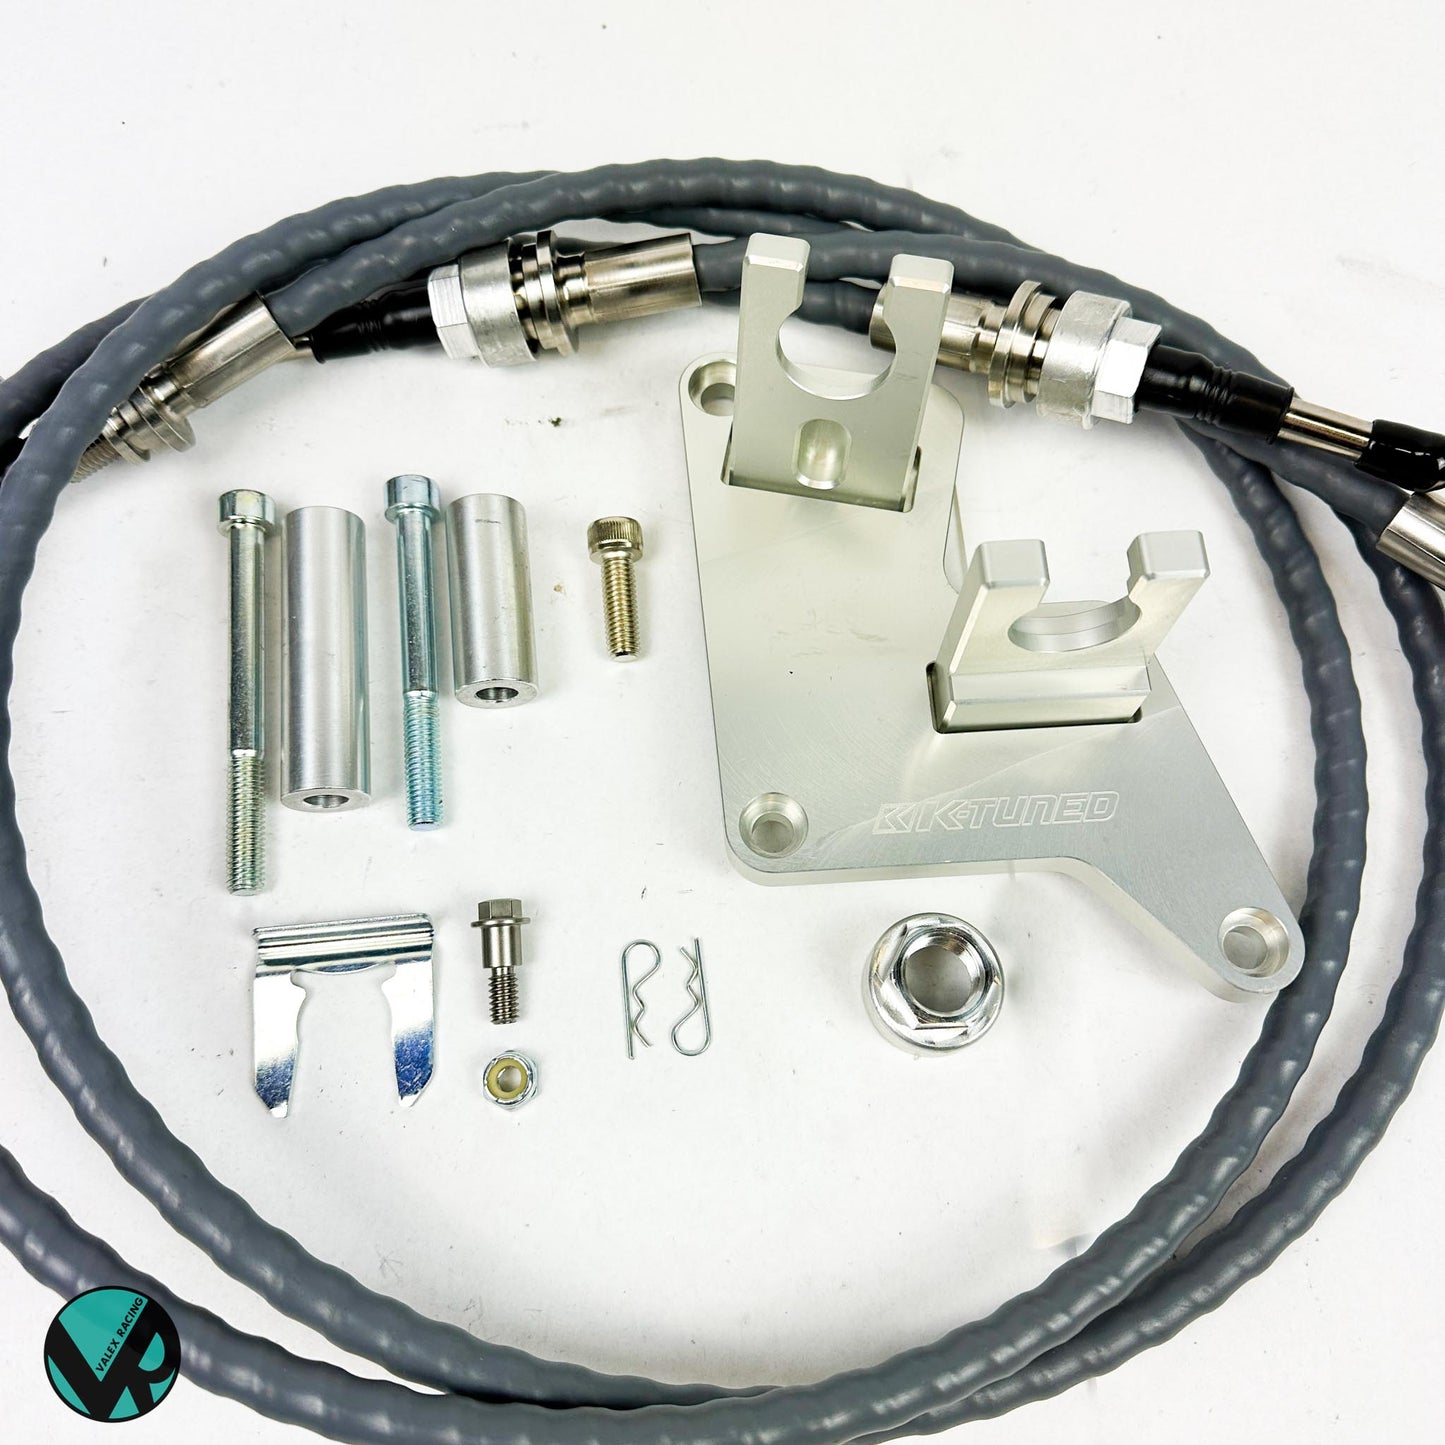 K Tuned Race-Spec Shifter Cables and Trans Bracket for AWD B-Series